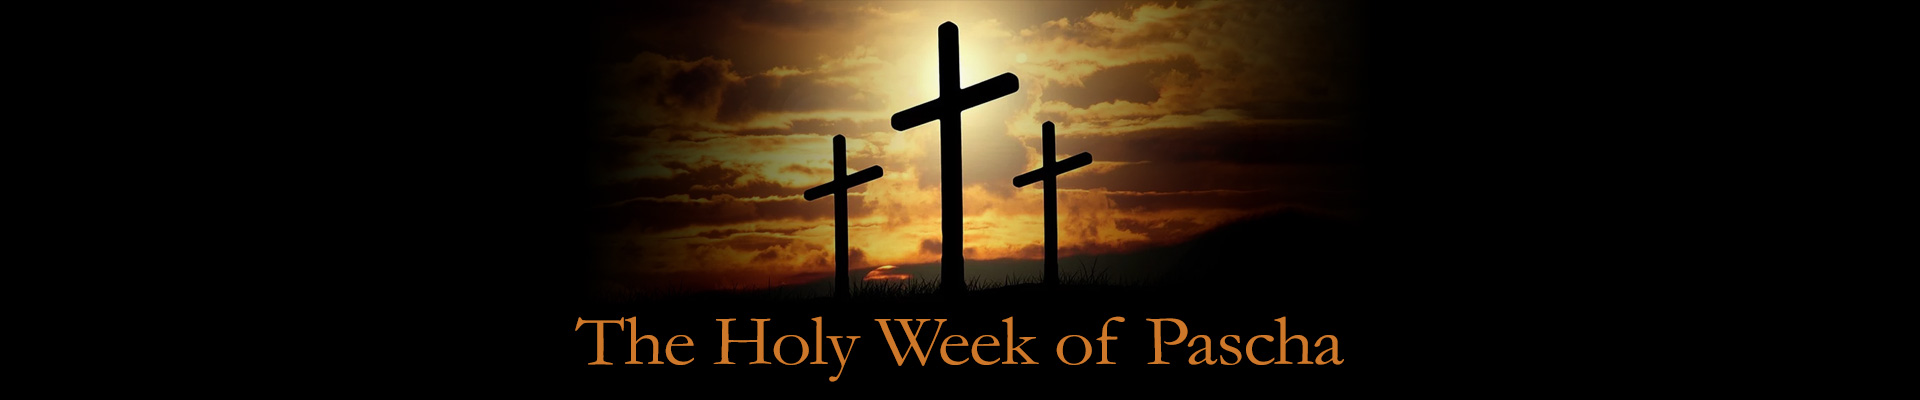 The Holy Week of Pascha